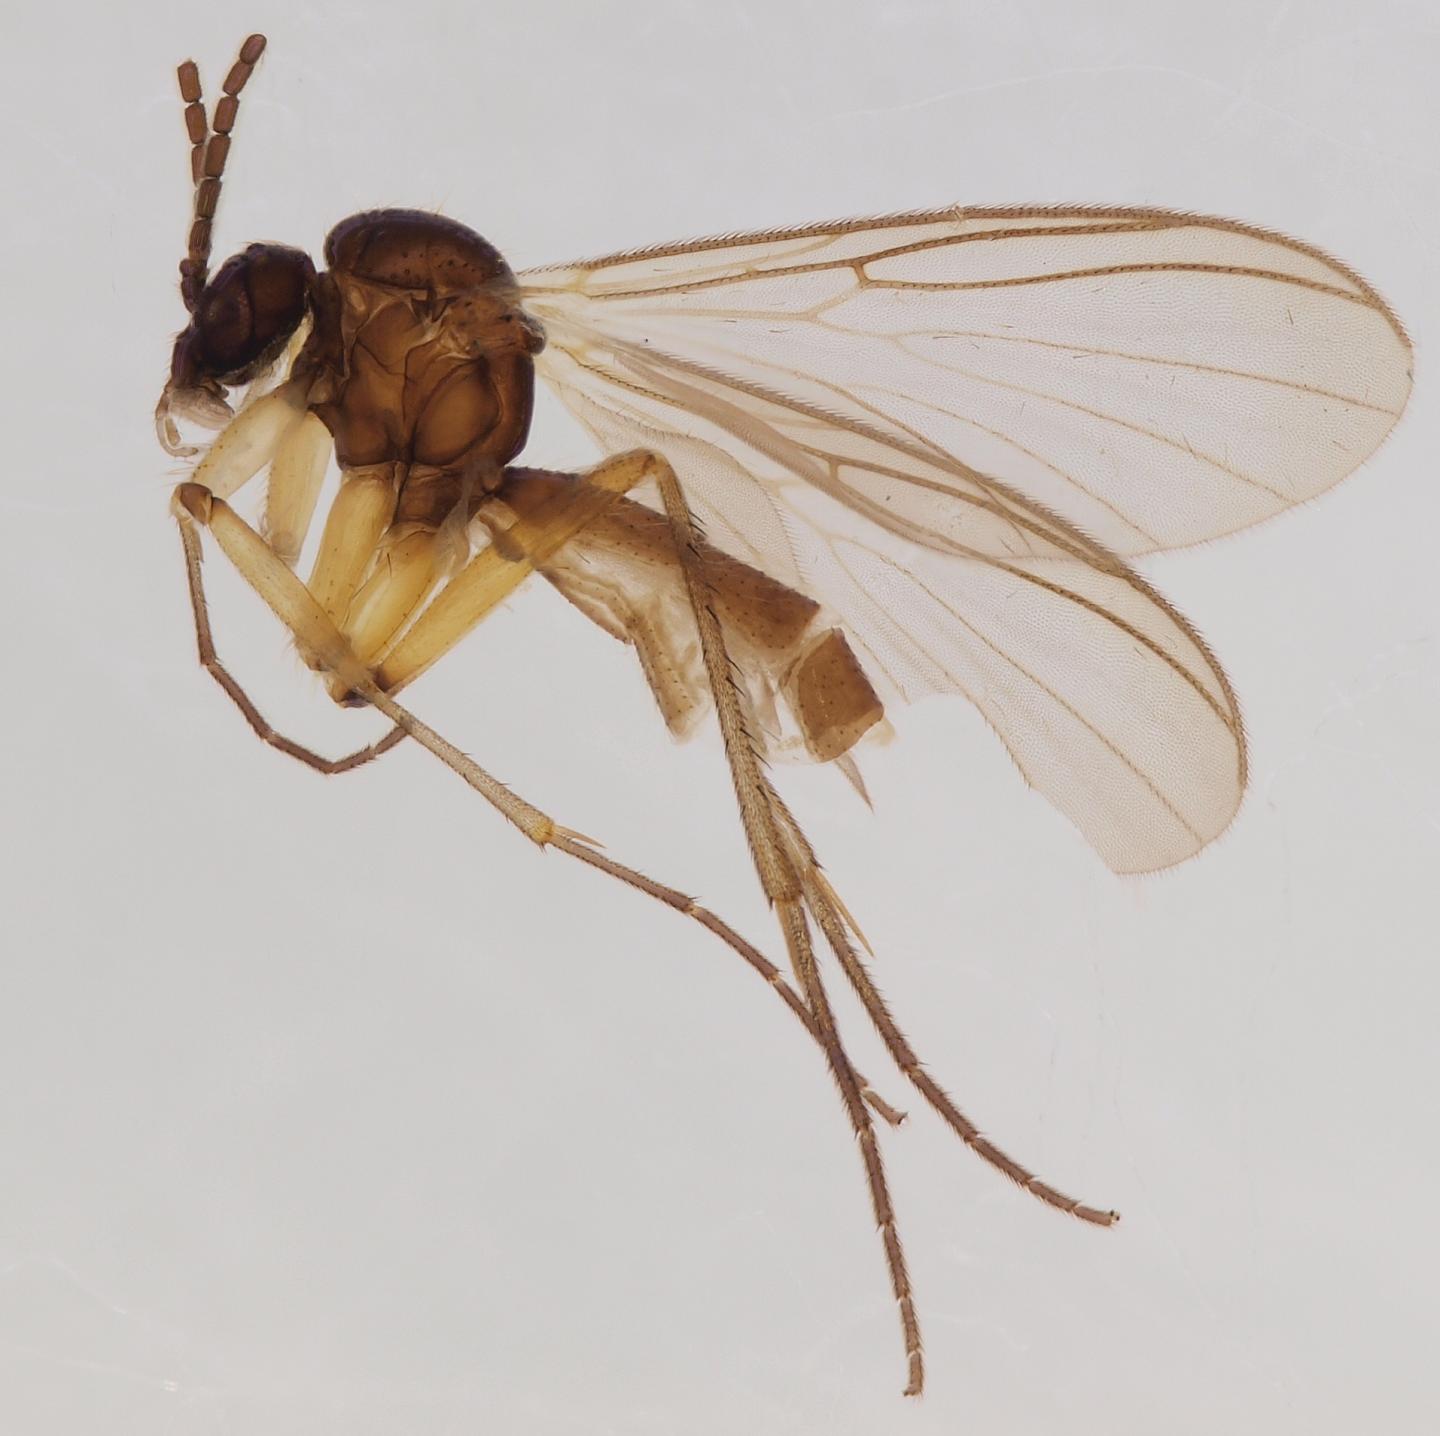 The Tip Of An Iceberg: Four New Fungus Gnat Species From The Scandinavian North (1/2)